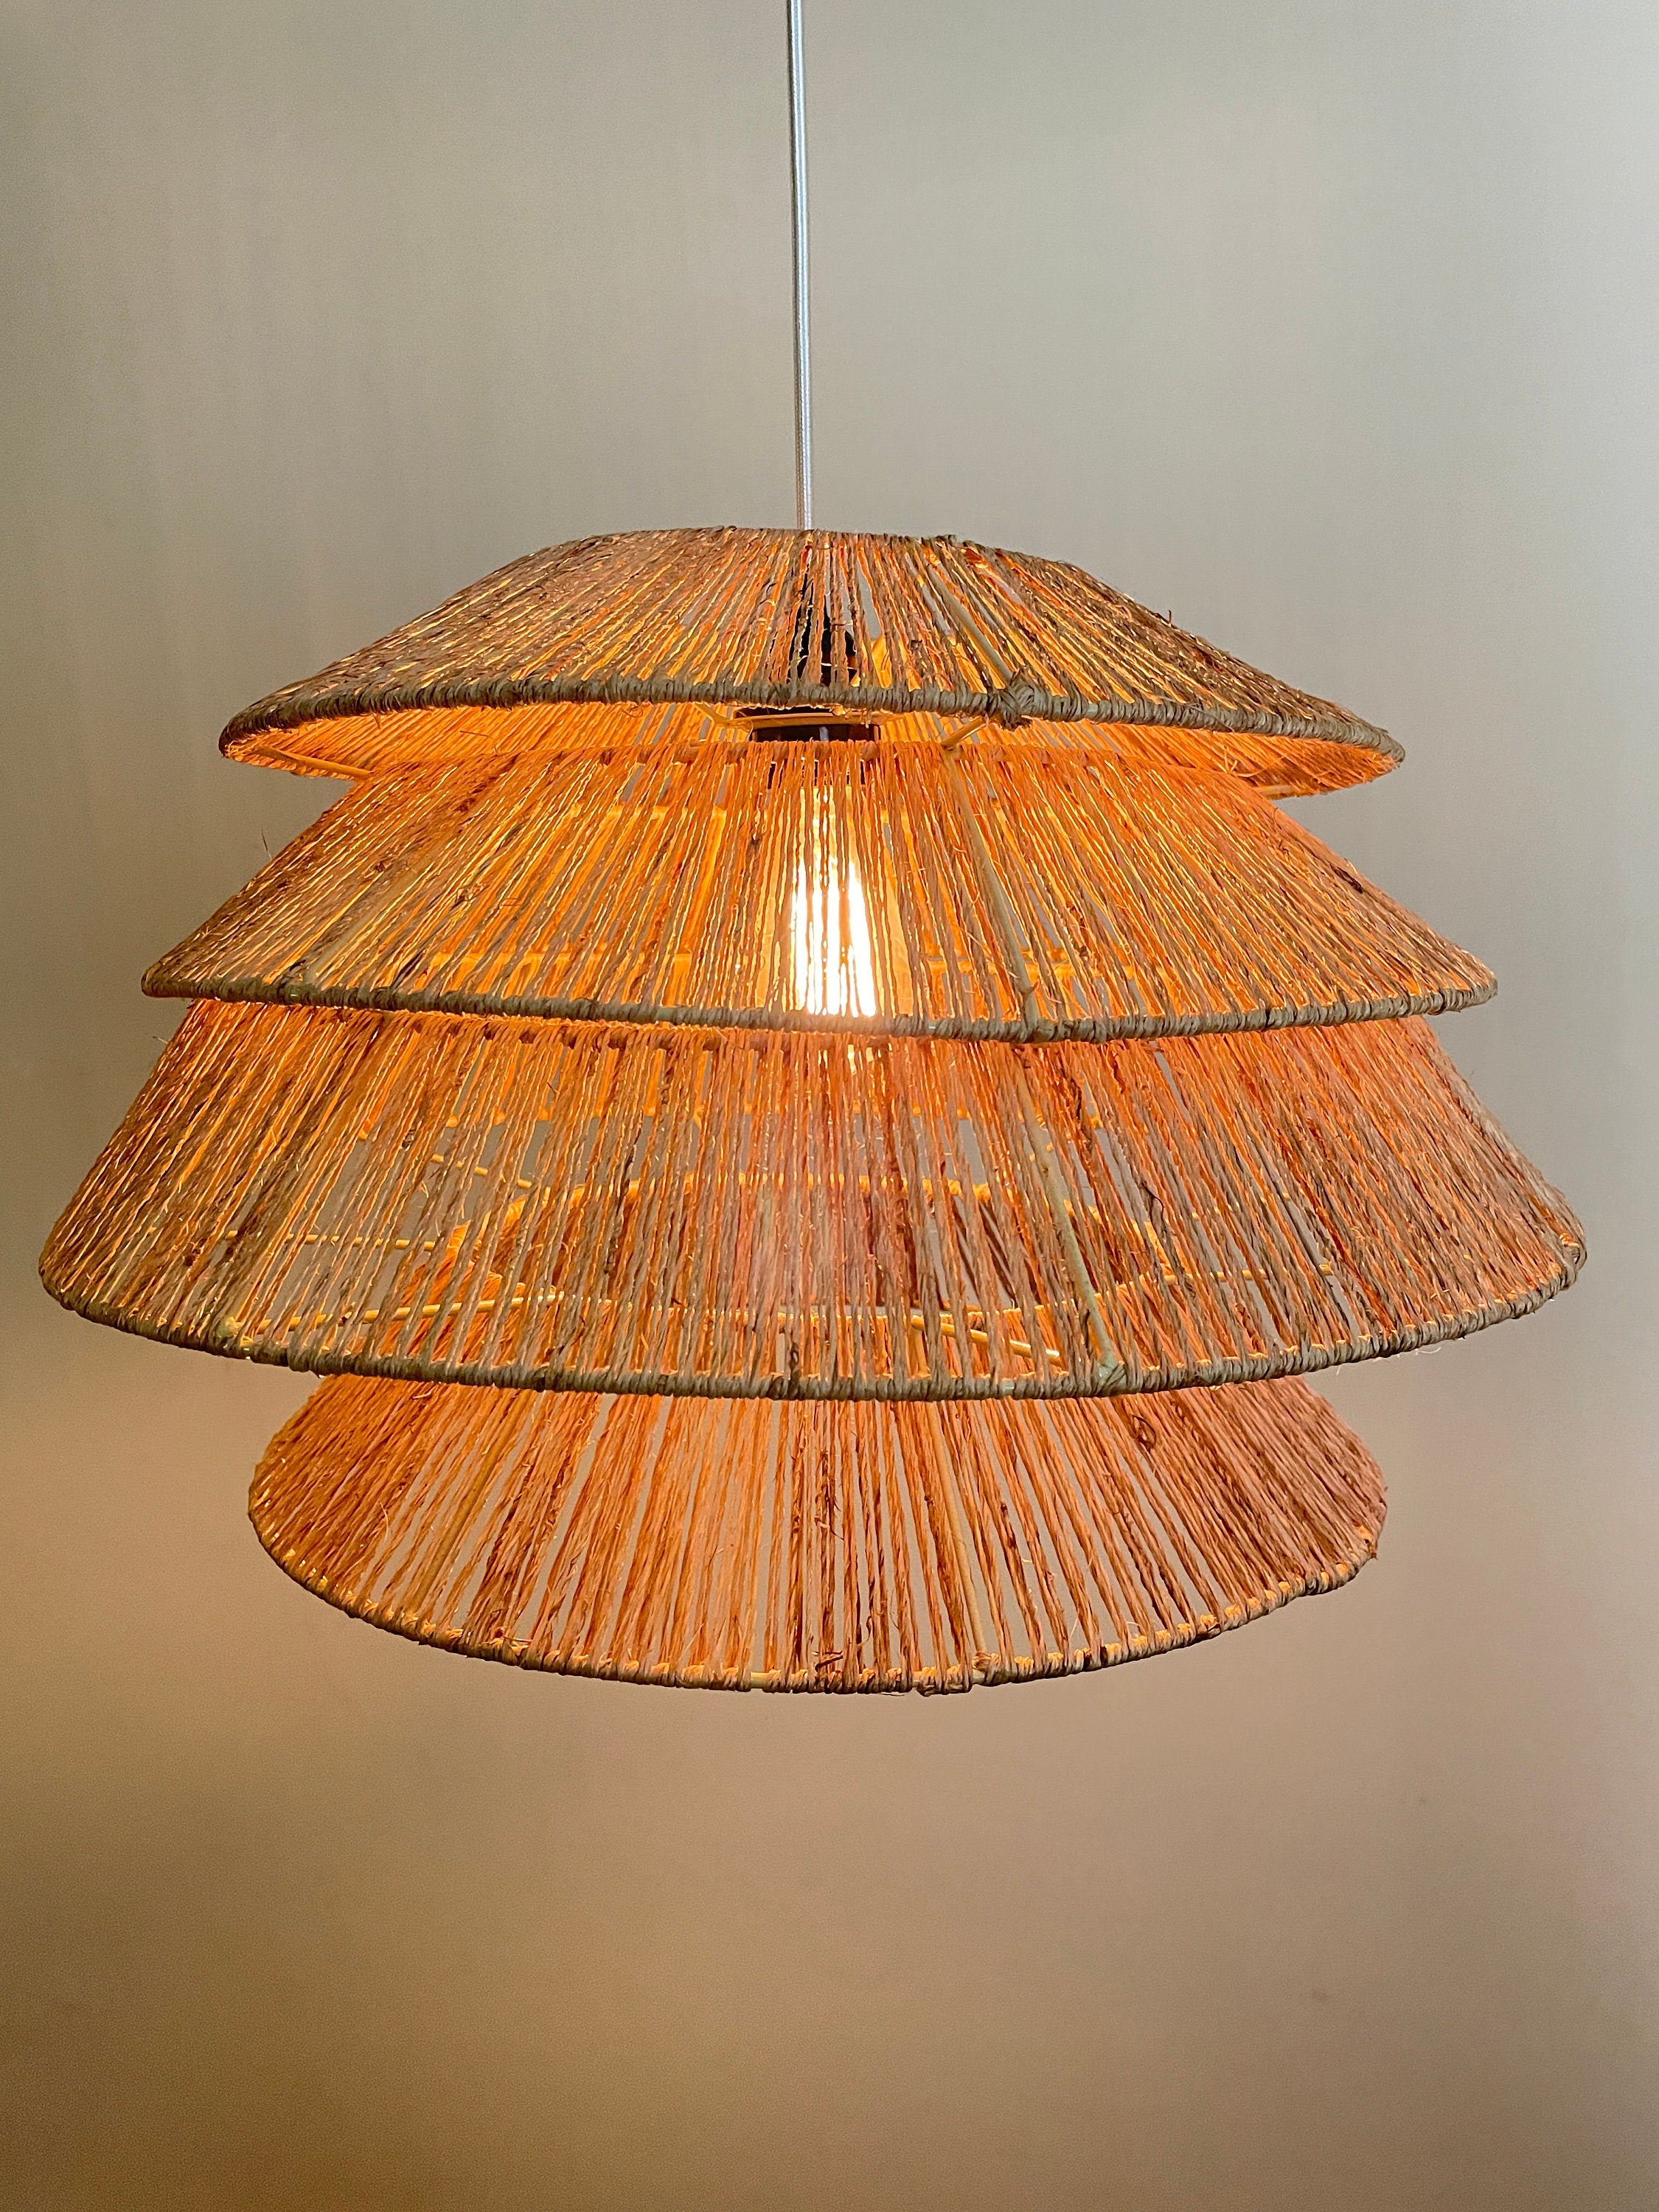 Tri Layered Jute Lampshade Handcrafted by Vietnamese Artisans, Sustainable Eco Friendly Lighting, Pendant Light, Chandelier, Lampshade